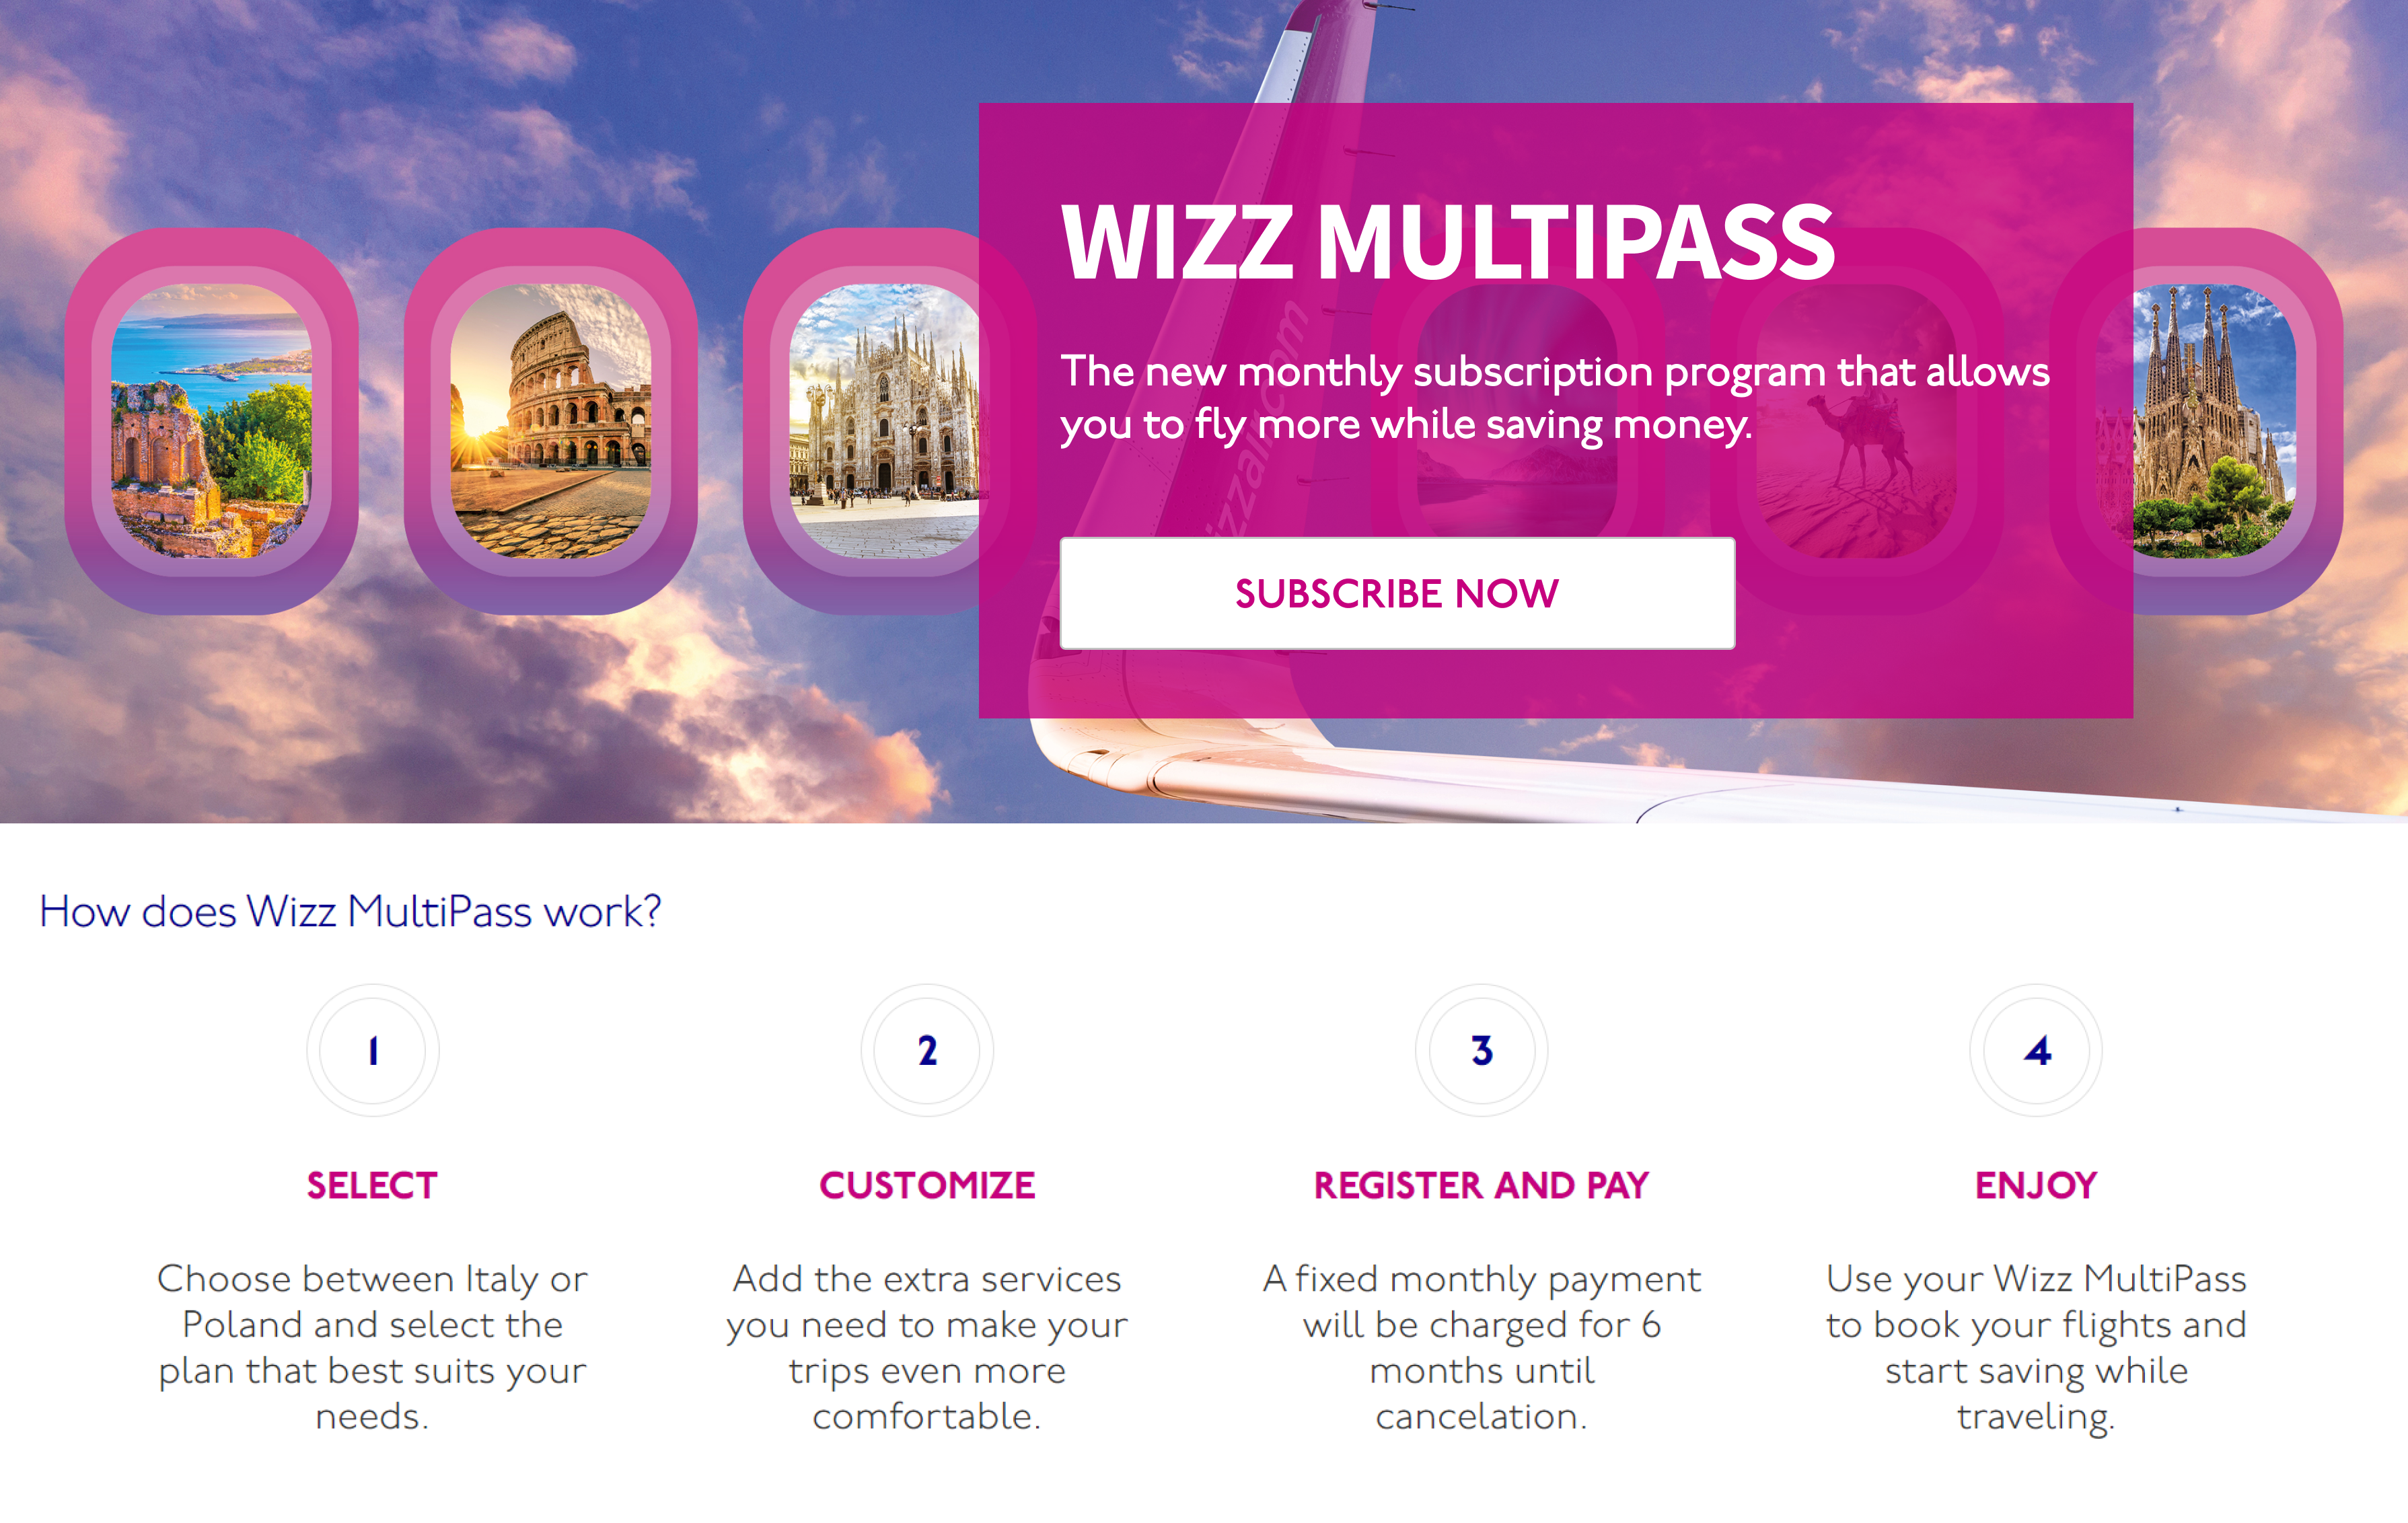 First Flight subscription in Europe is Now Available for Purchase Thanks to Wizz Air and Caravelo Partnership